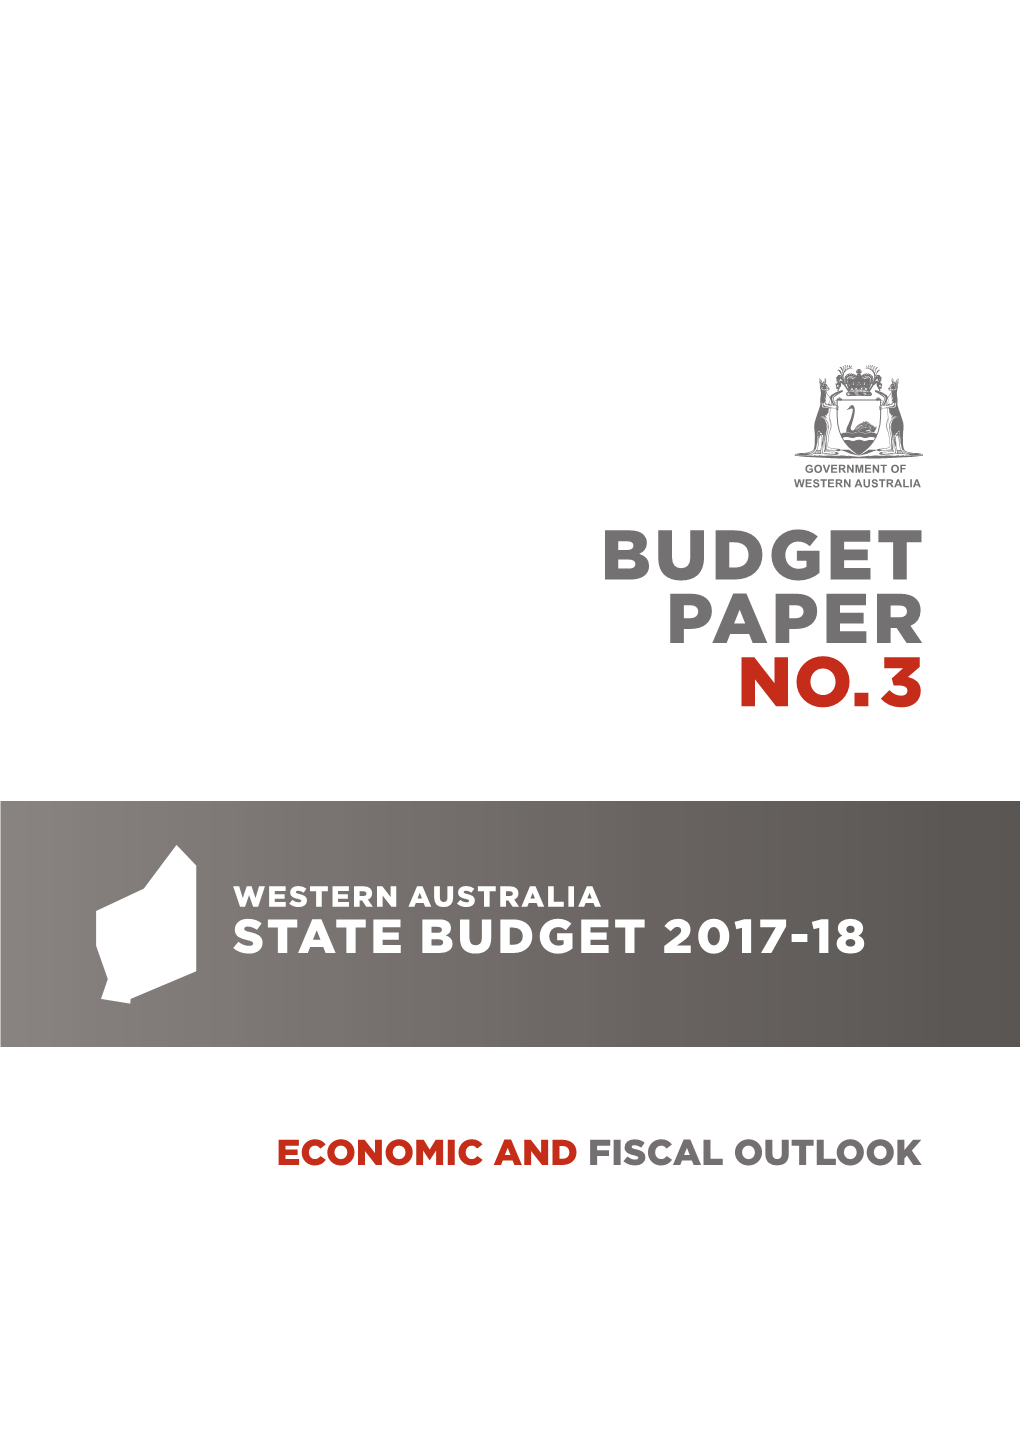 2017-18 Budget. Economic and Fiscal Outlook. Budget Paper No. 3